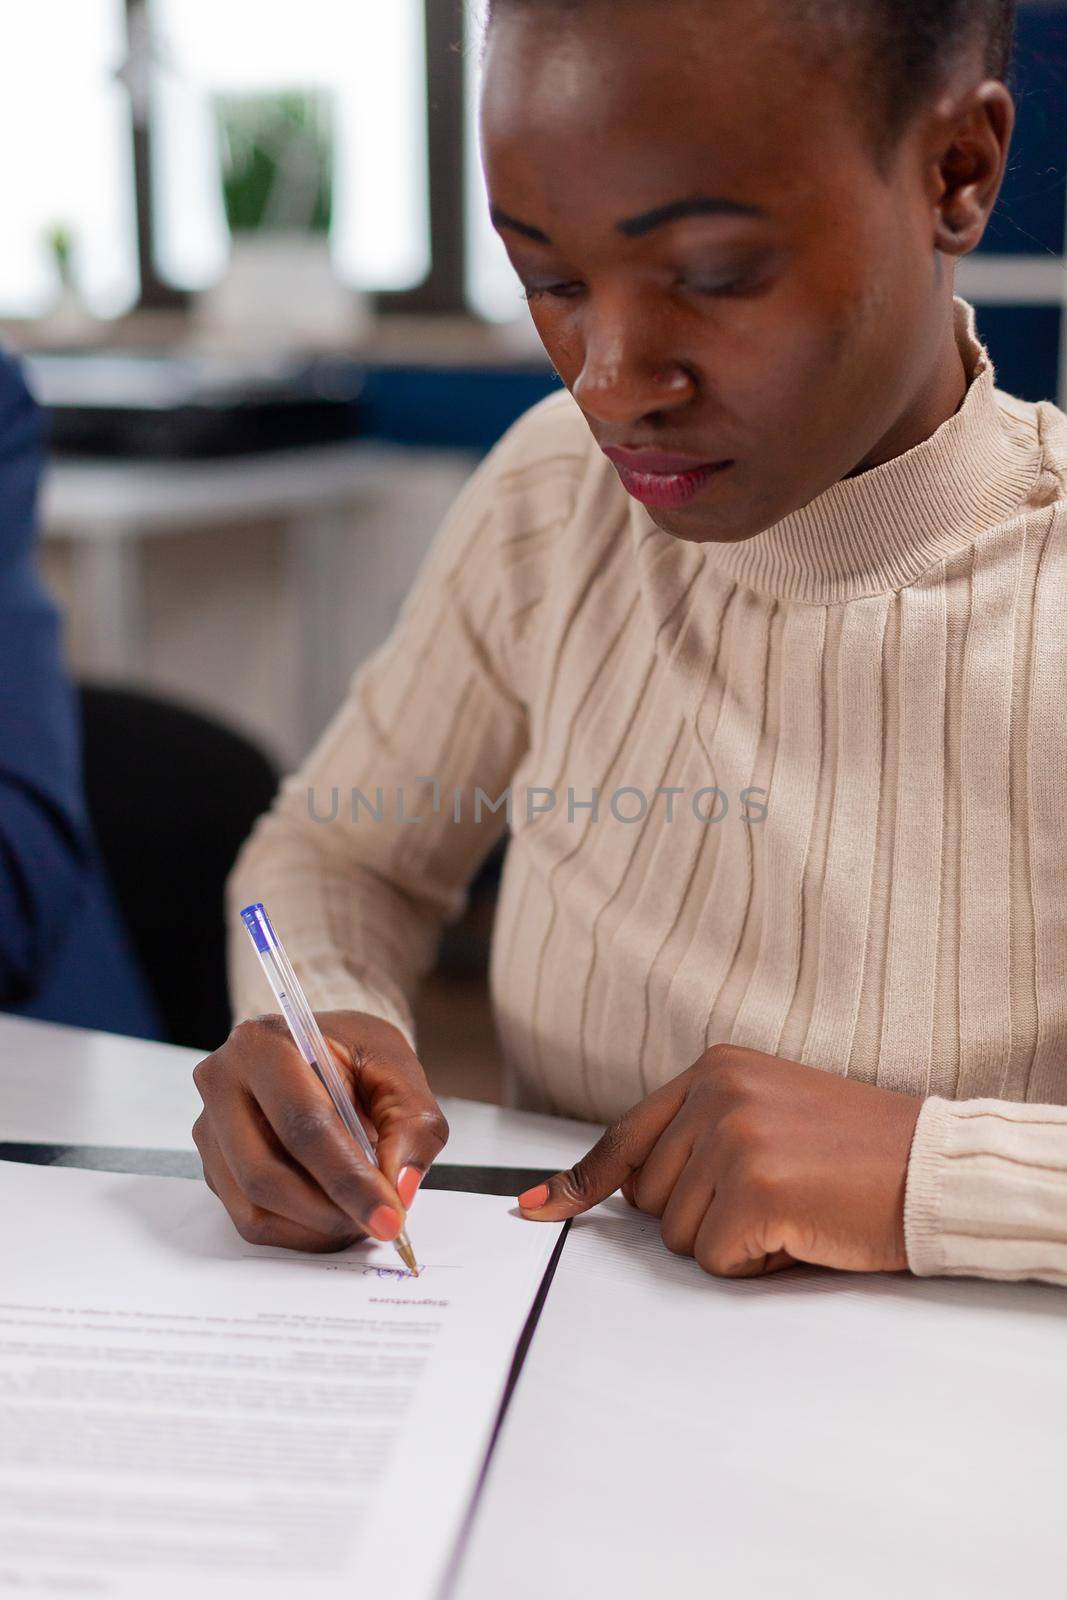 African businesswoman reading signing documents its while business partners sharing paperwork. Executive director meeting shareholders in start up office, making satisfactorily agreement.